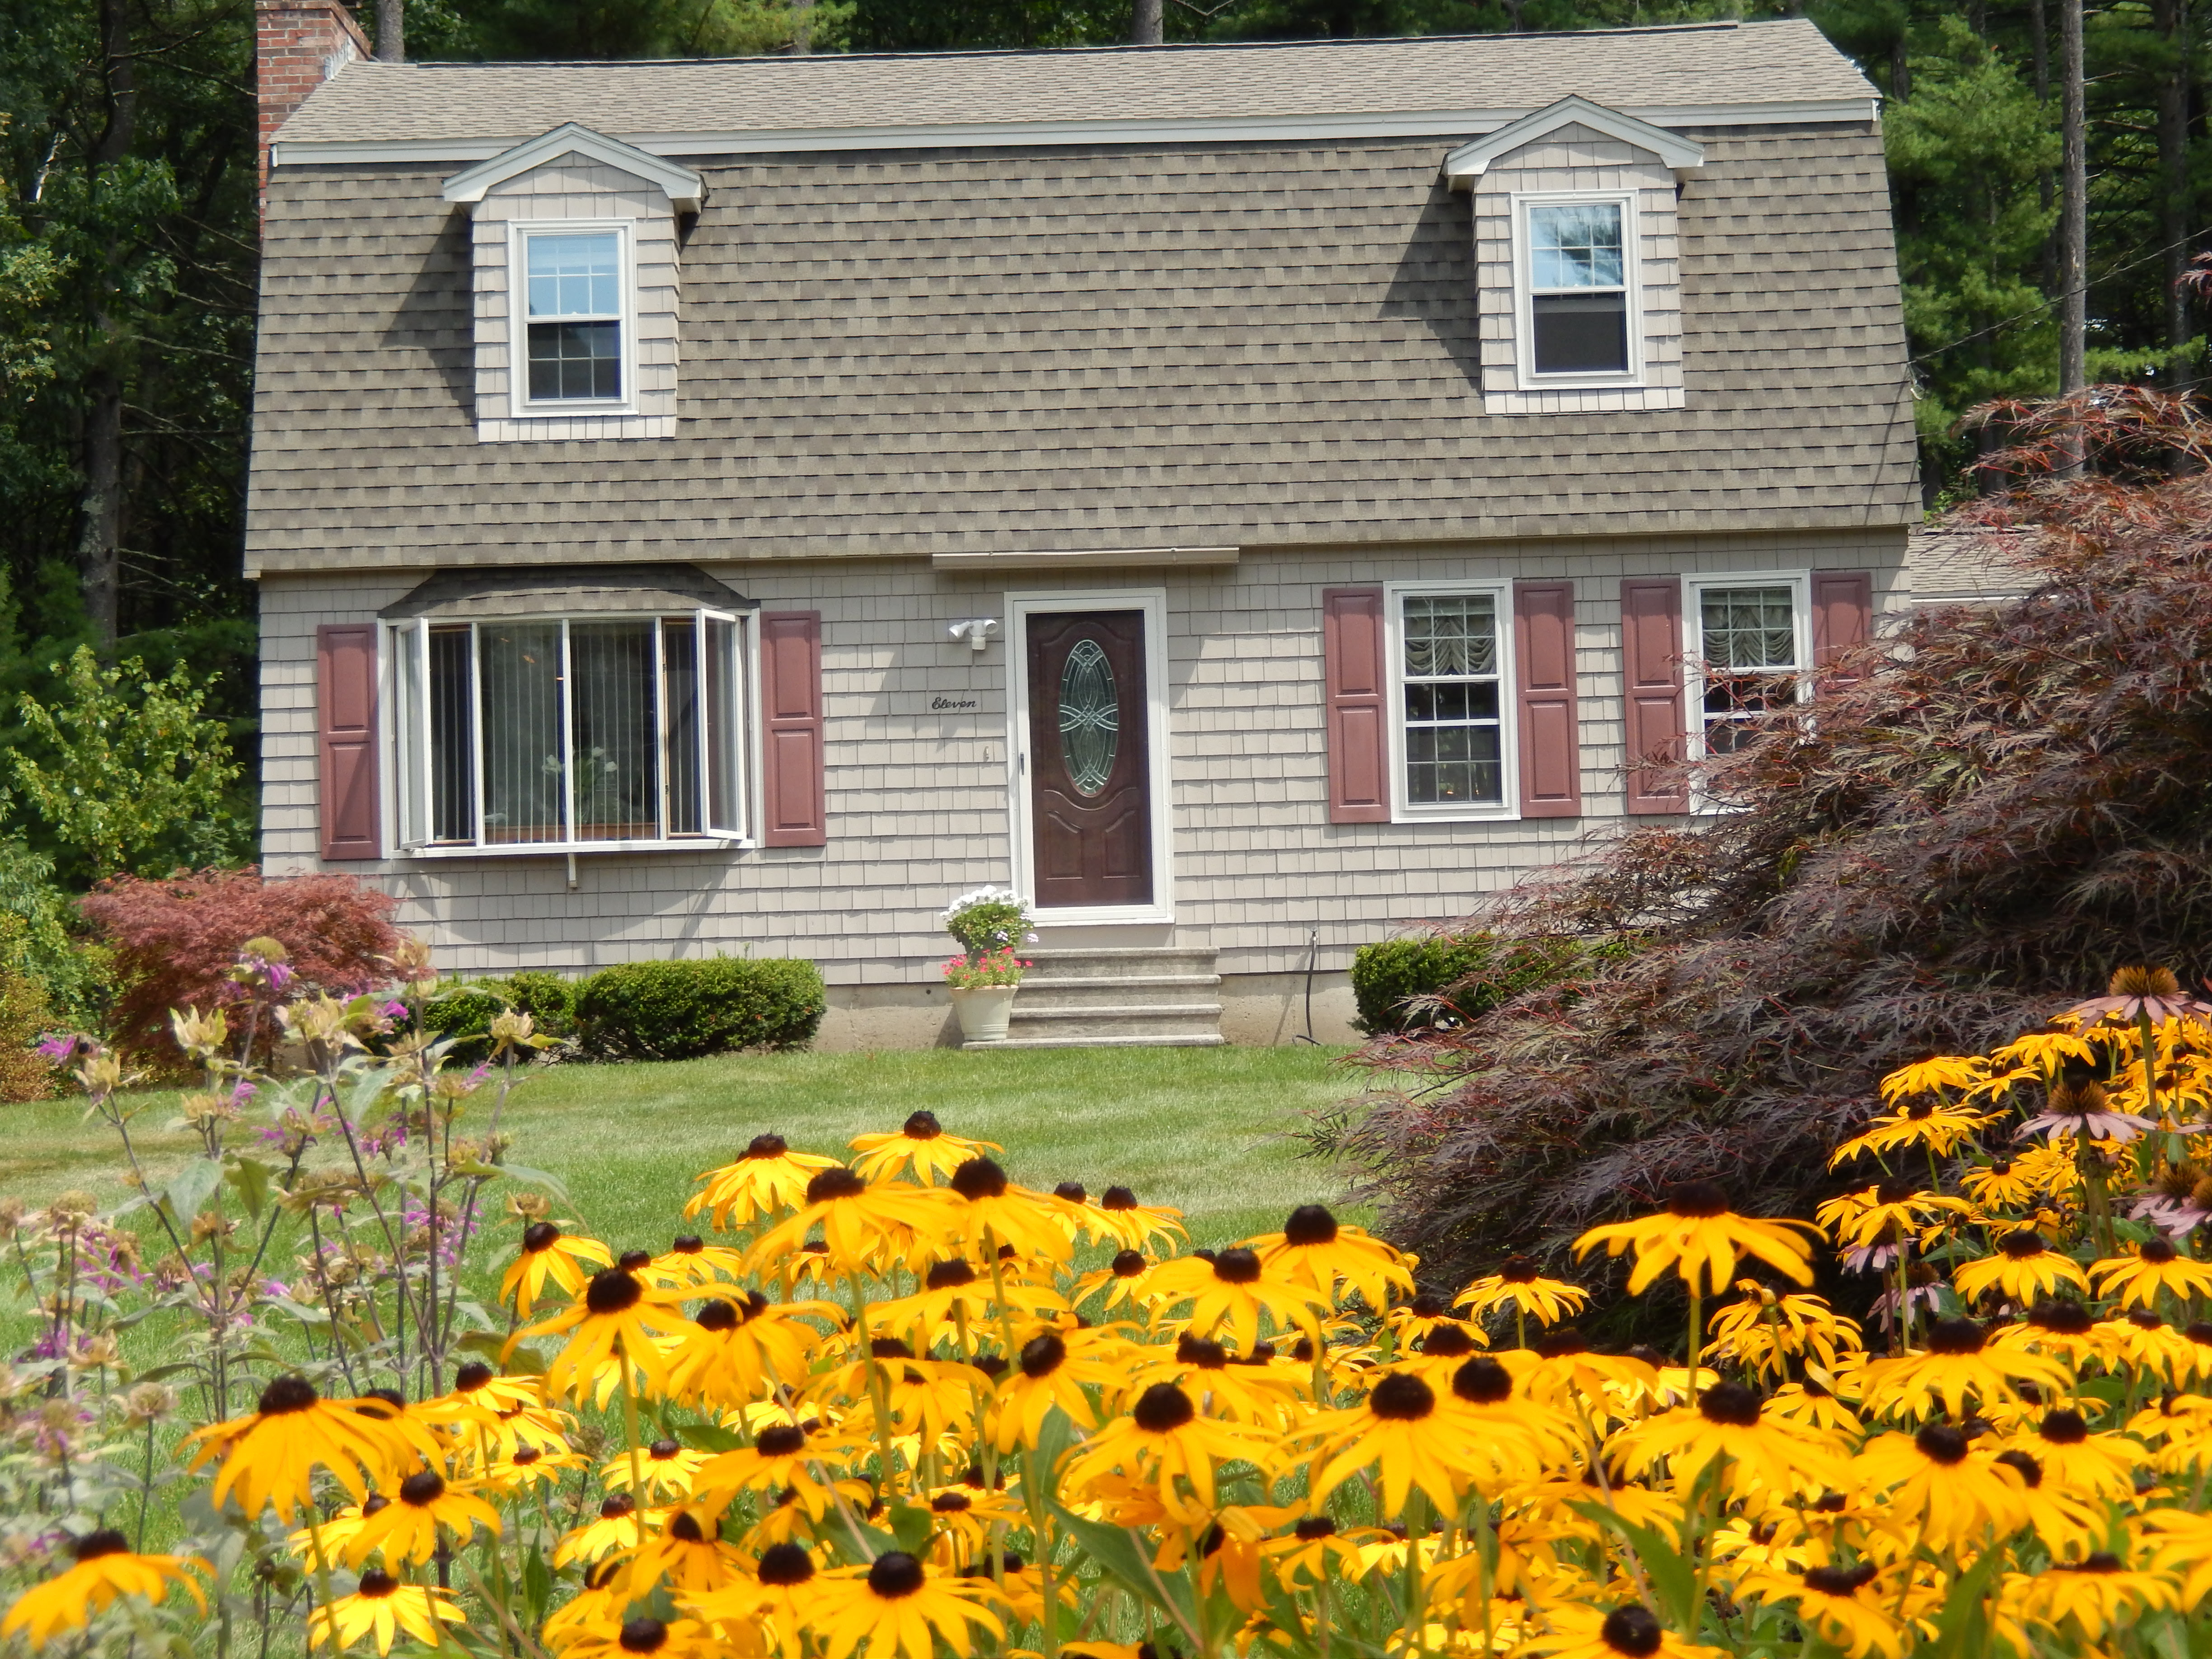 JUST LISTED 289 900 11 Jaqueline Street Hudson  NH  by 